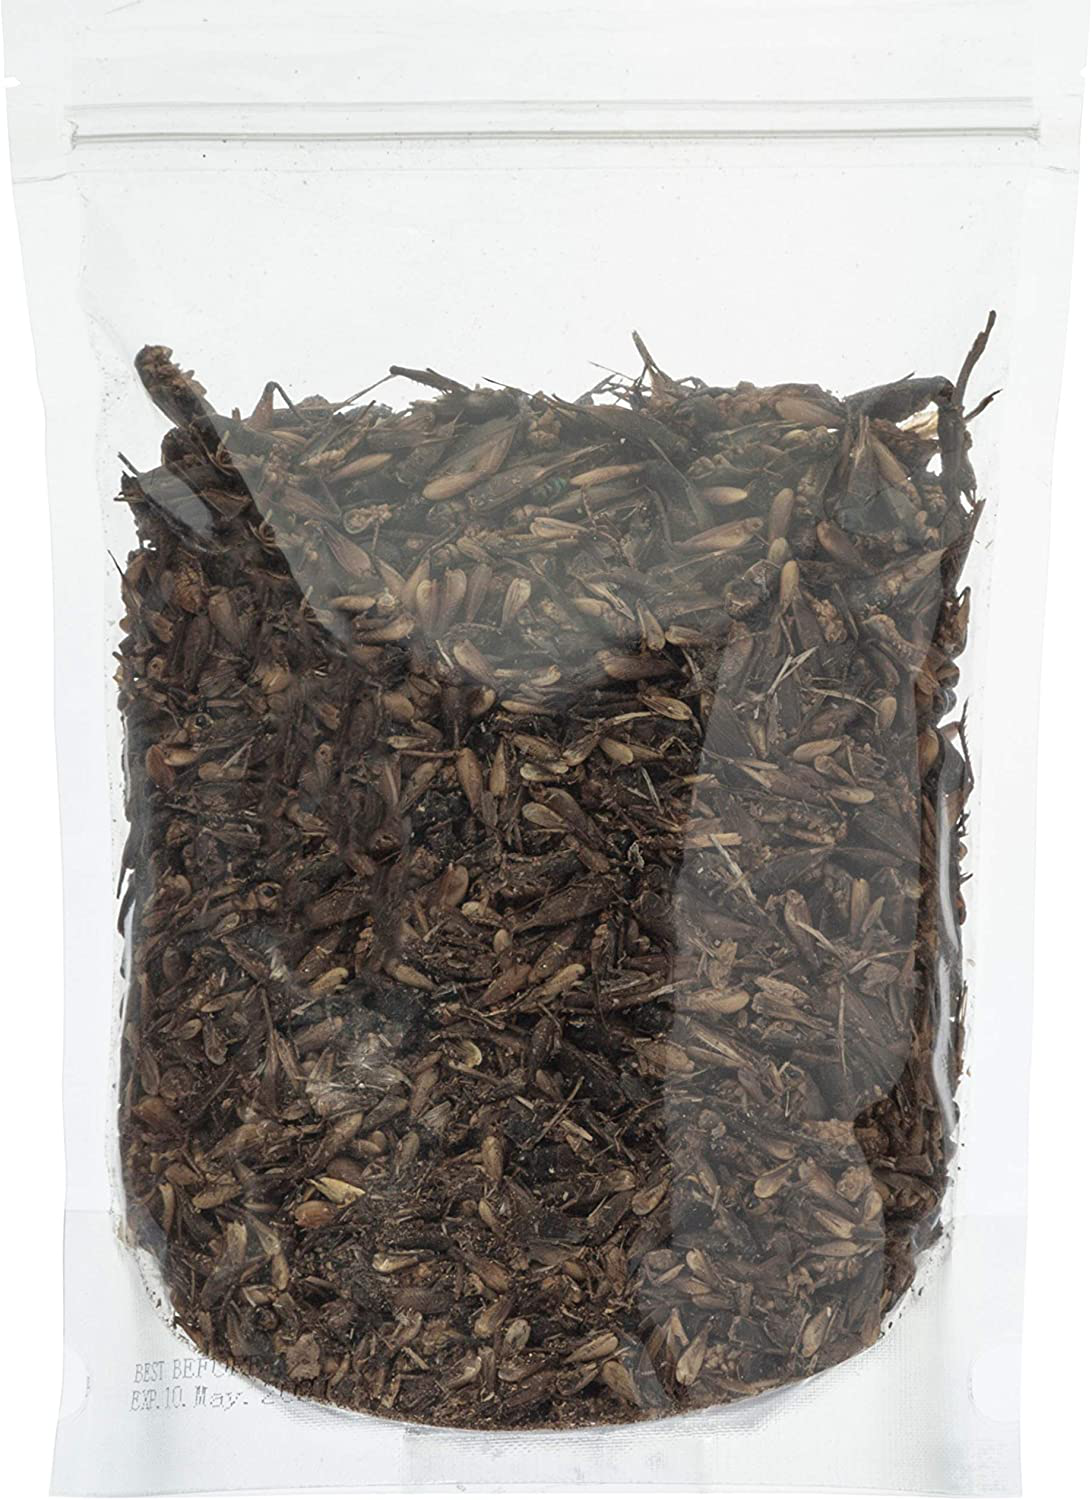 Natural Dried Crickets - Food for Bearded Dragons, Wild Birds, Chicken, Fish, and Reptiles - (8 Oz Resealable Bag) - Veterinary Certified Animals & Pet Supplies > Pet Supplies > Reptile & Amphibian Supplies > Reptile & Amphibian Food Appetizing Mealworms   